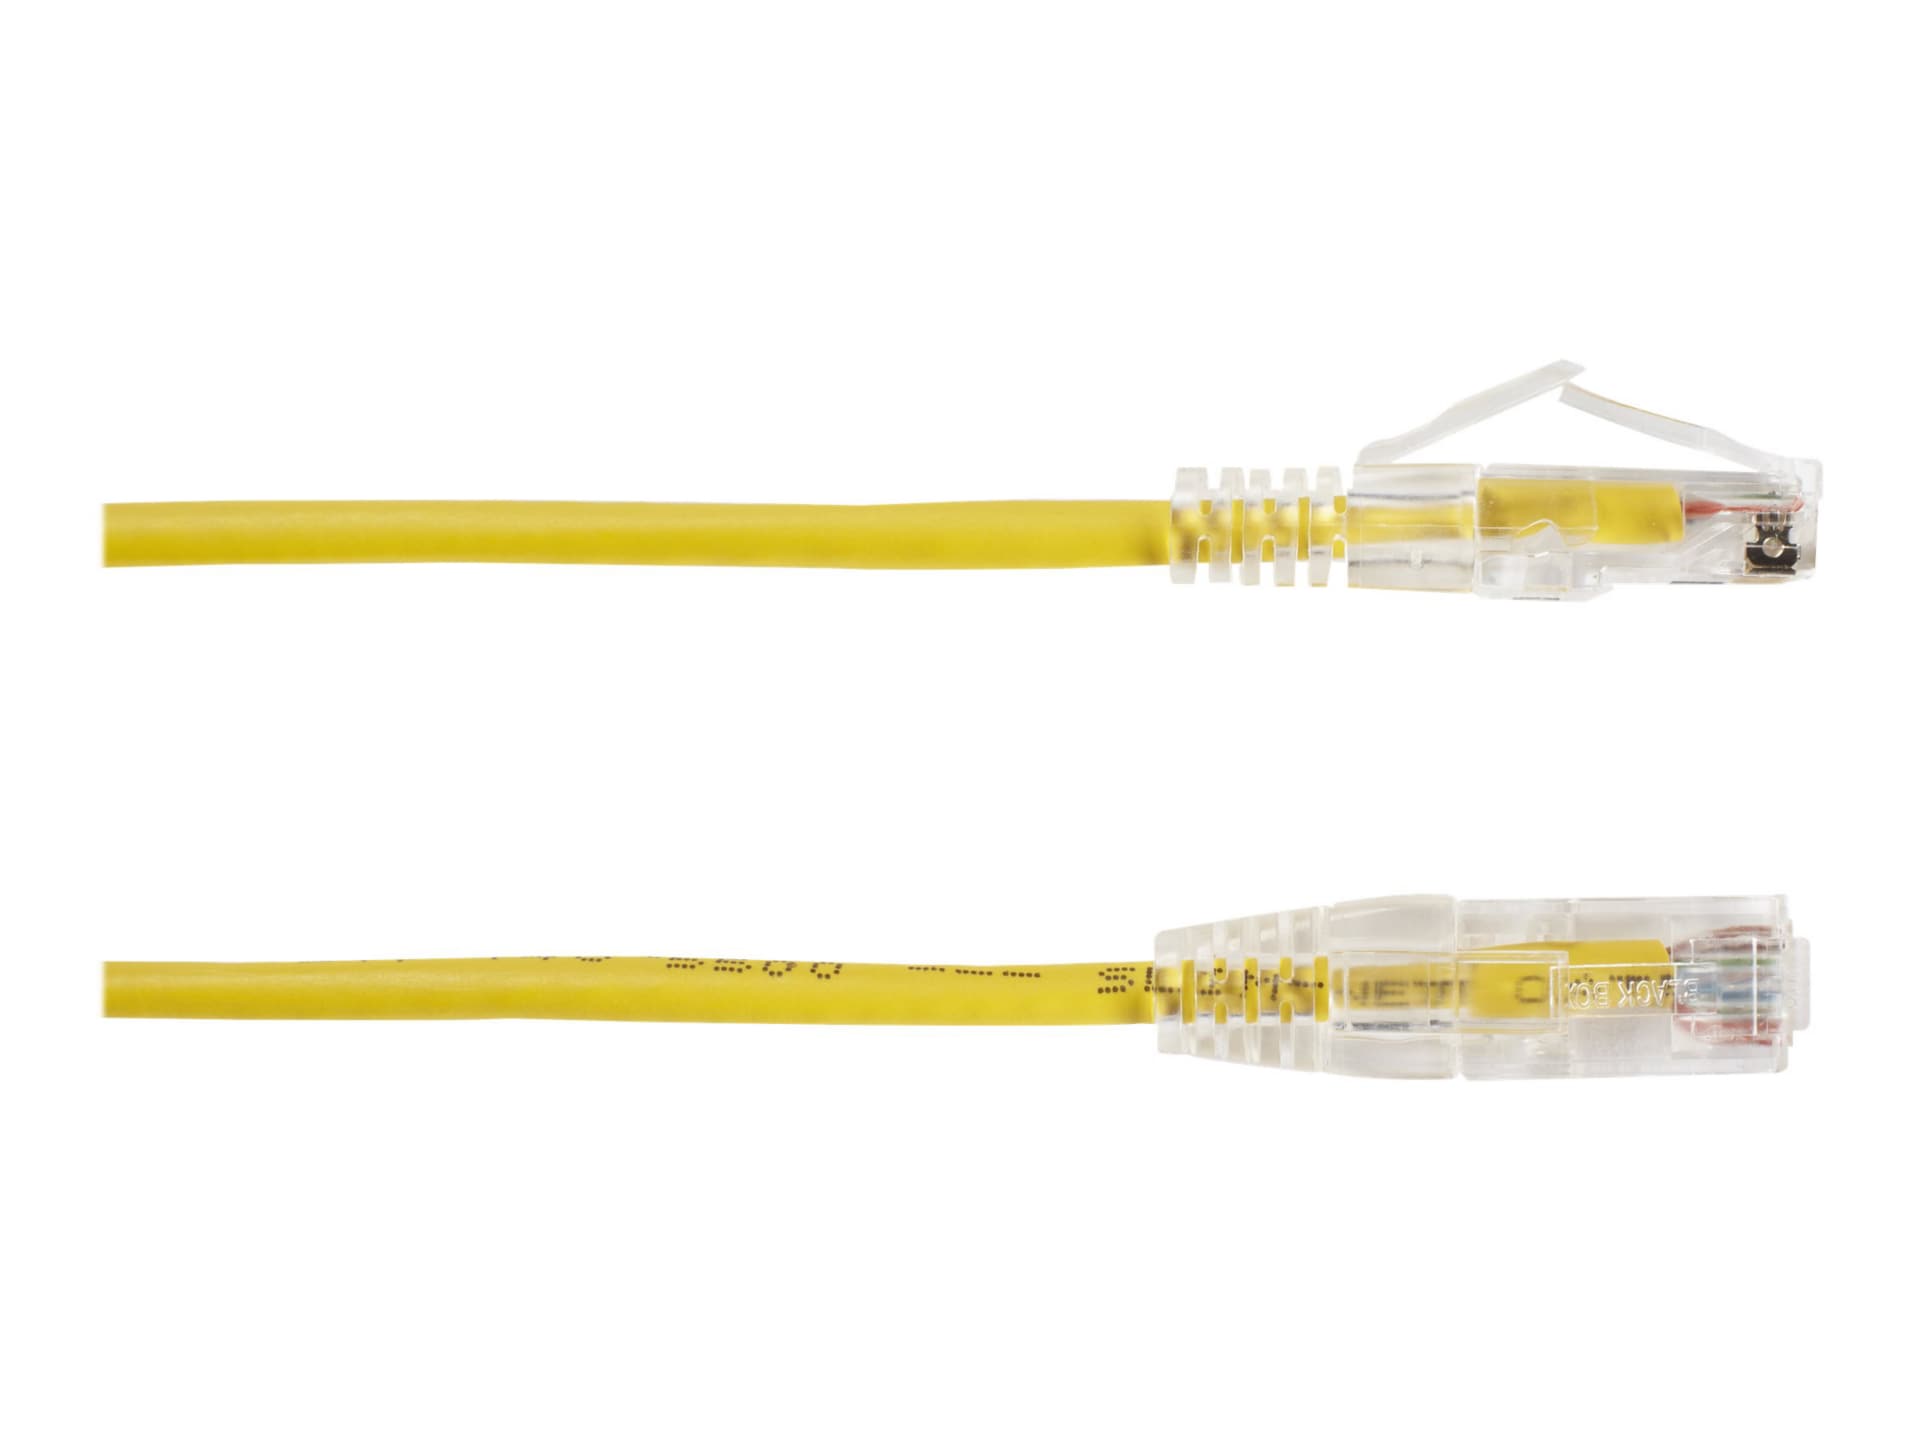 Black Box Slim-Net patch cable - 4 ft - yellow